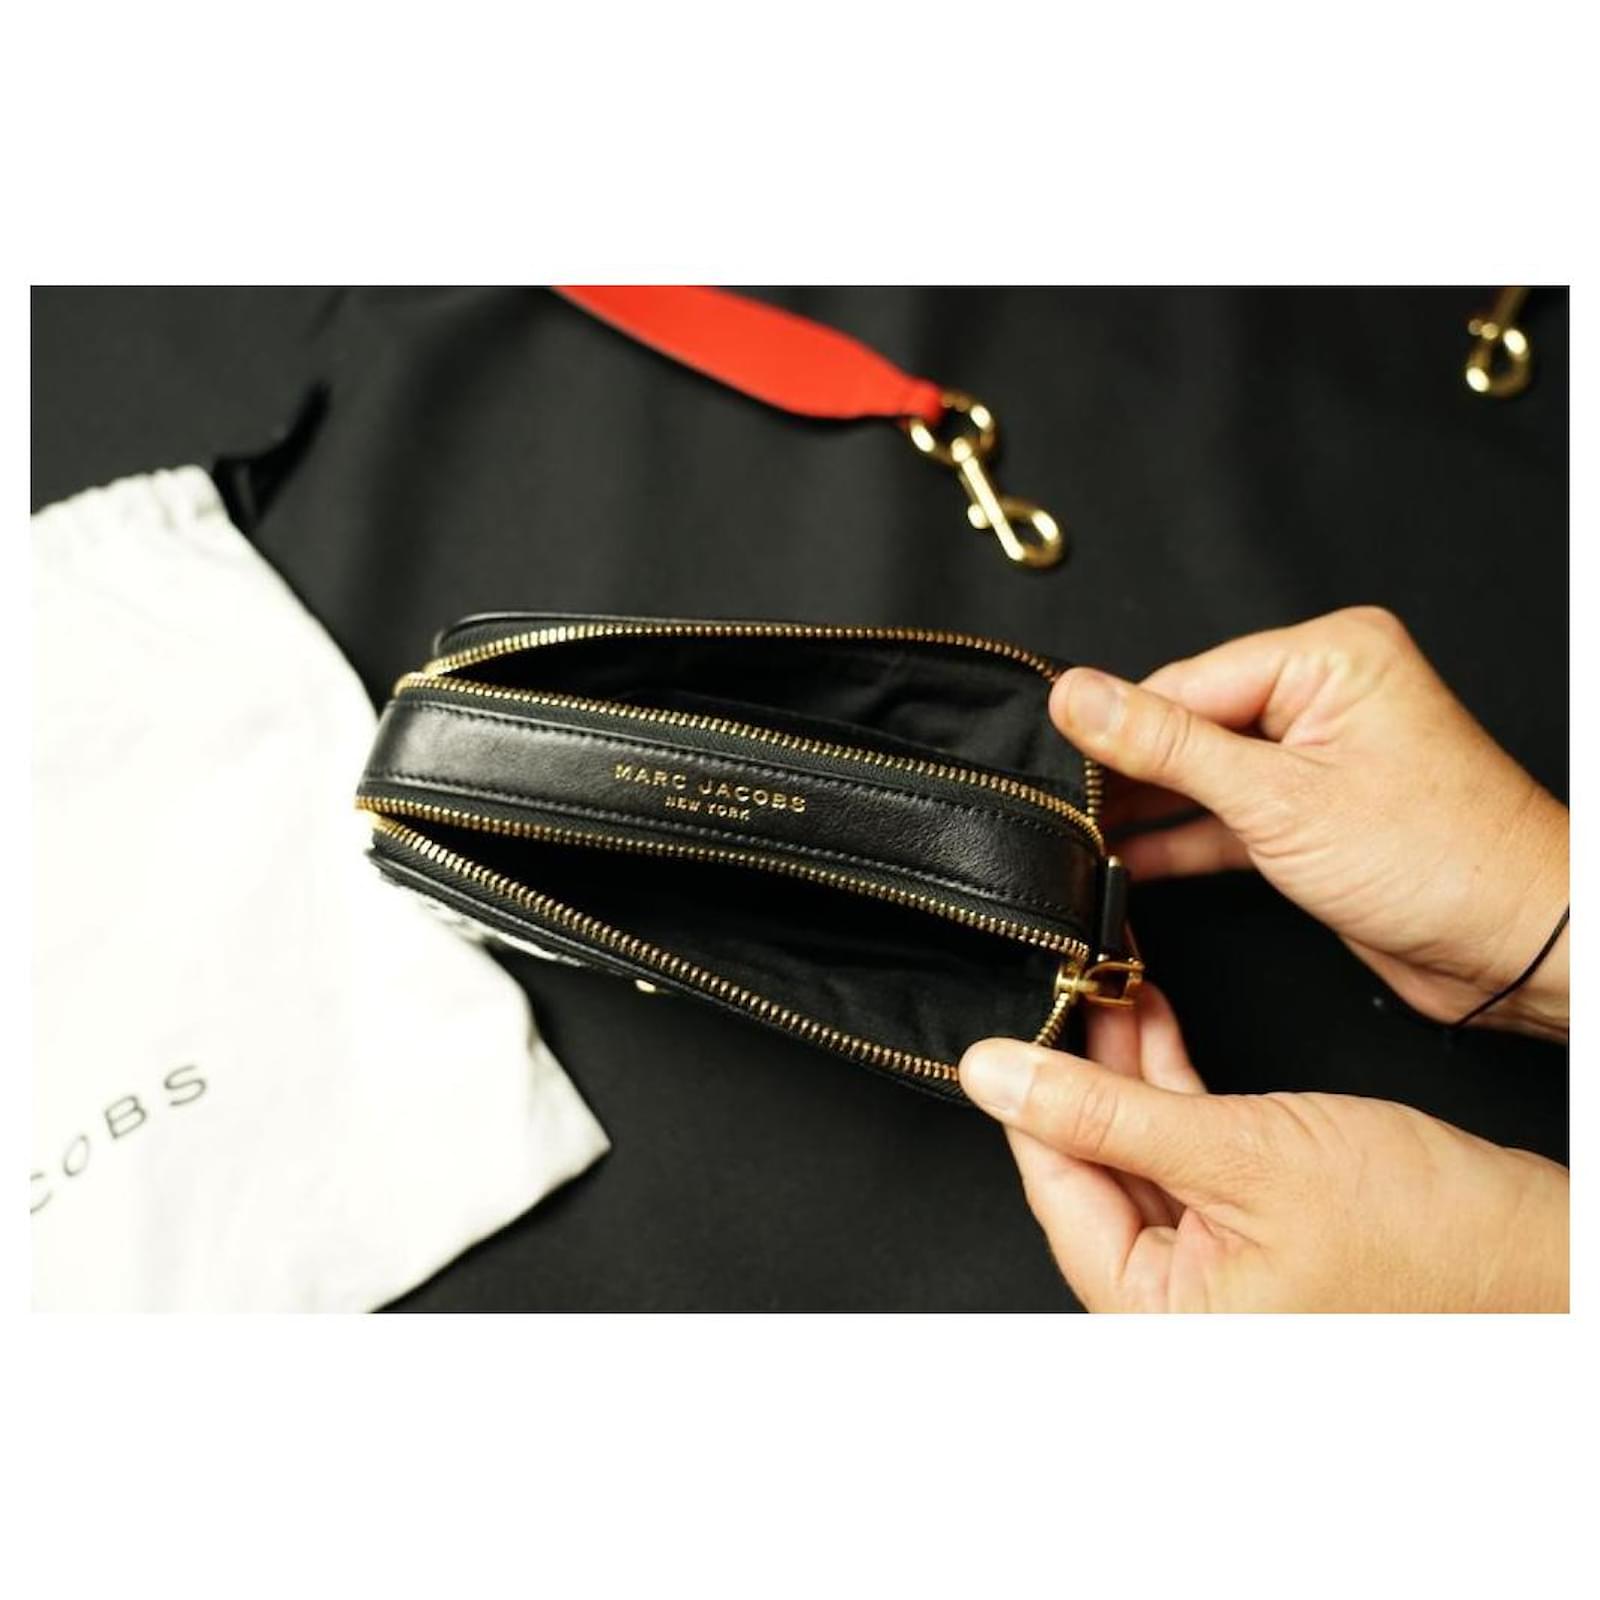 Marc Jacobs The Snapshot Small Camera Bag in Black/Red — UFO No More